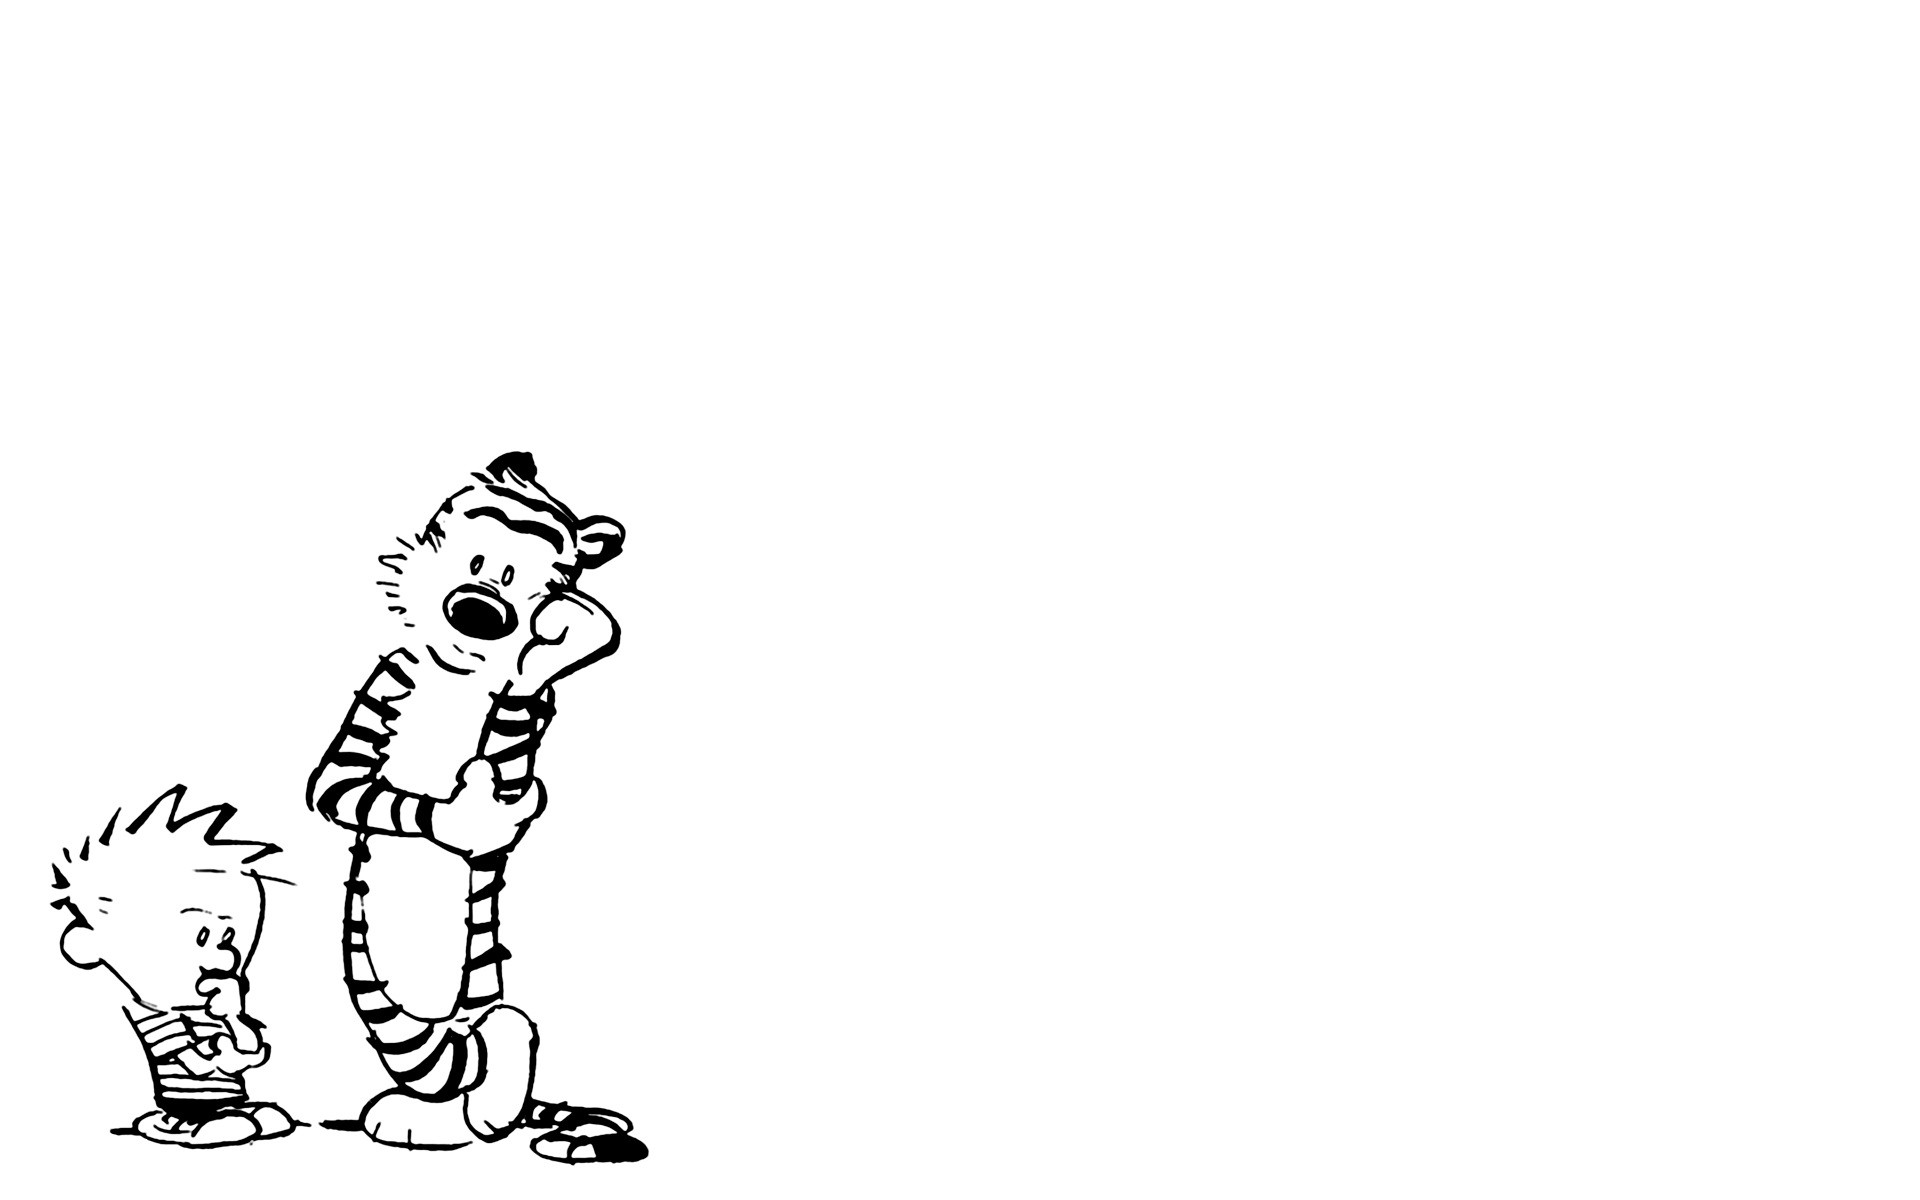 1920x1200 Images Black Calvin and Hobbes Wallpapers.